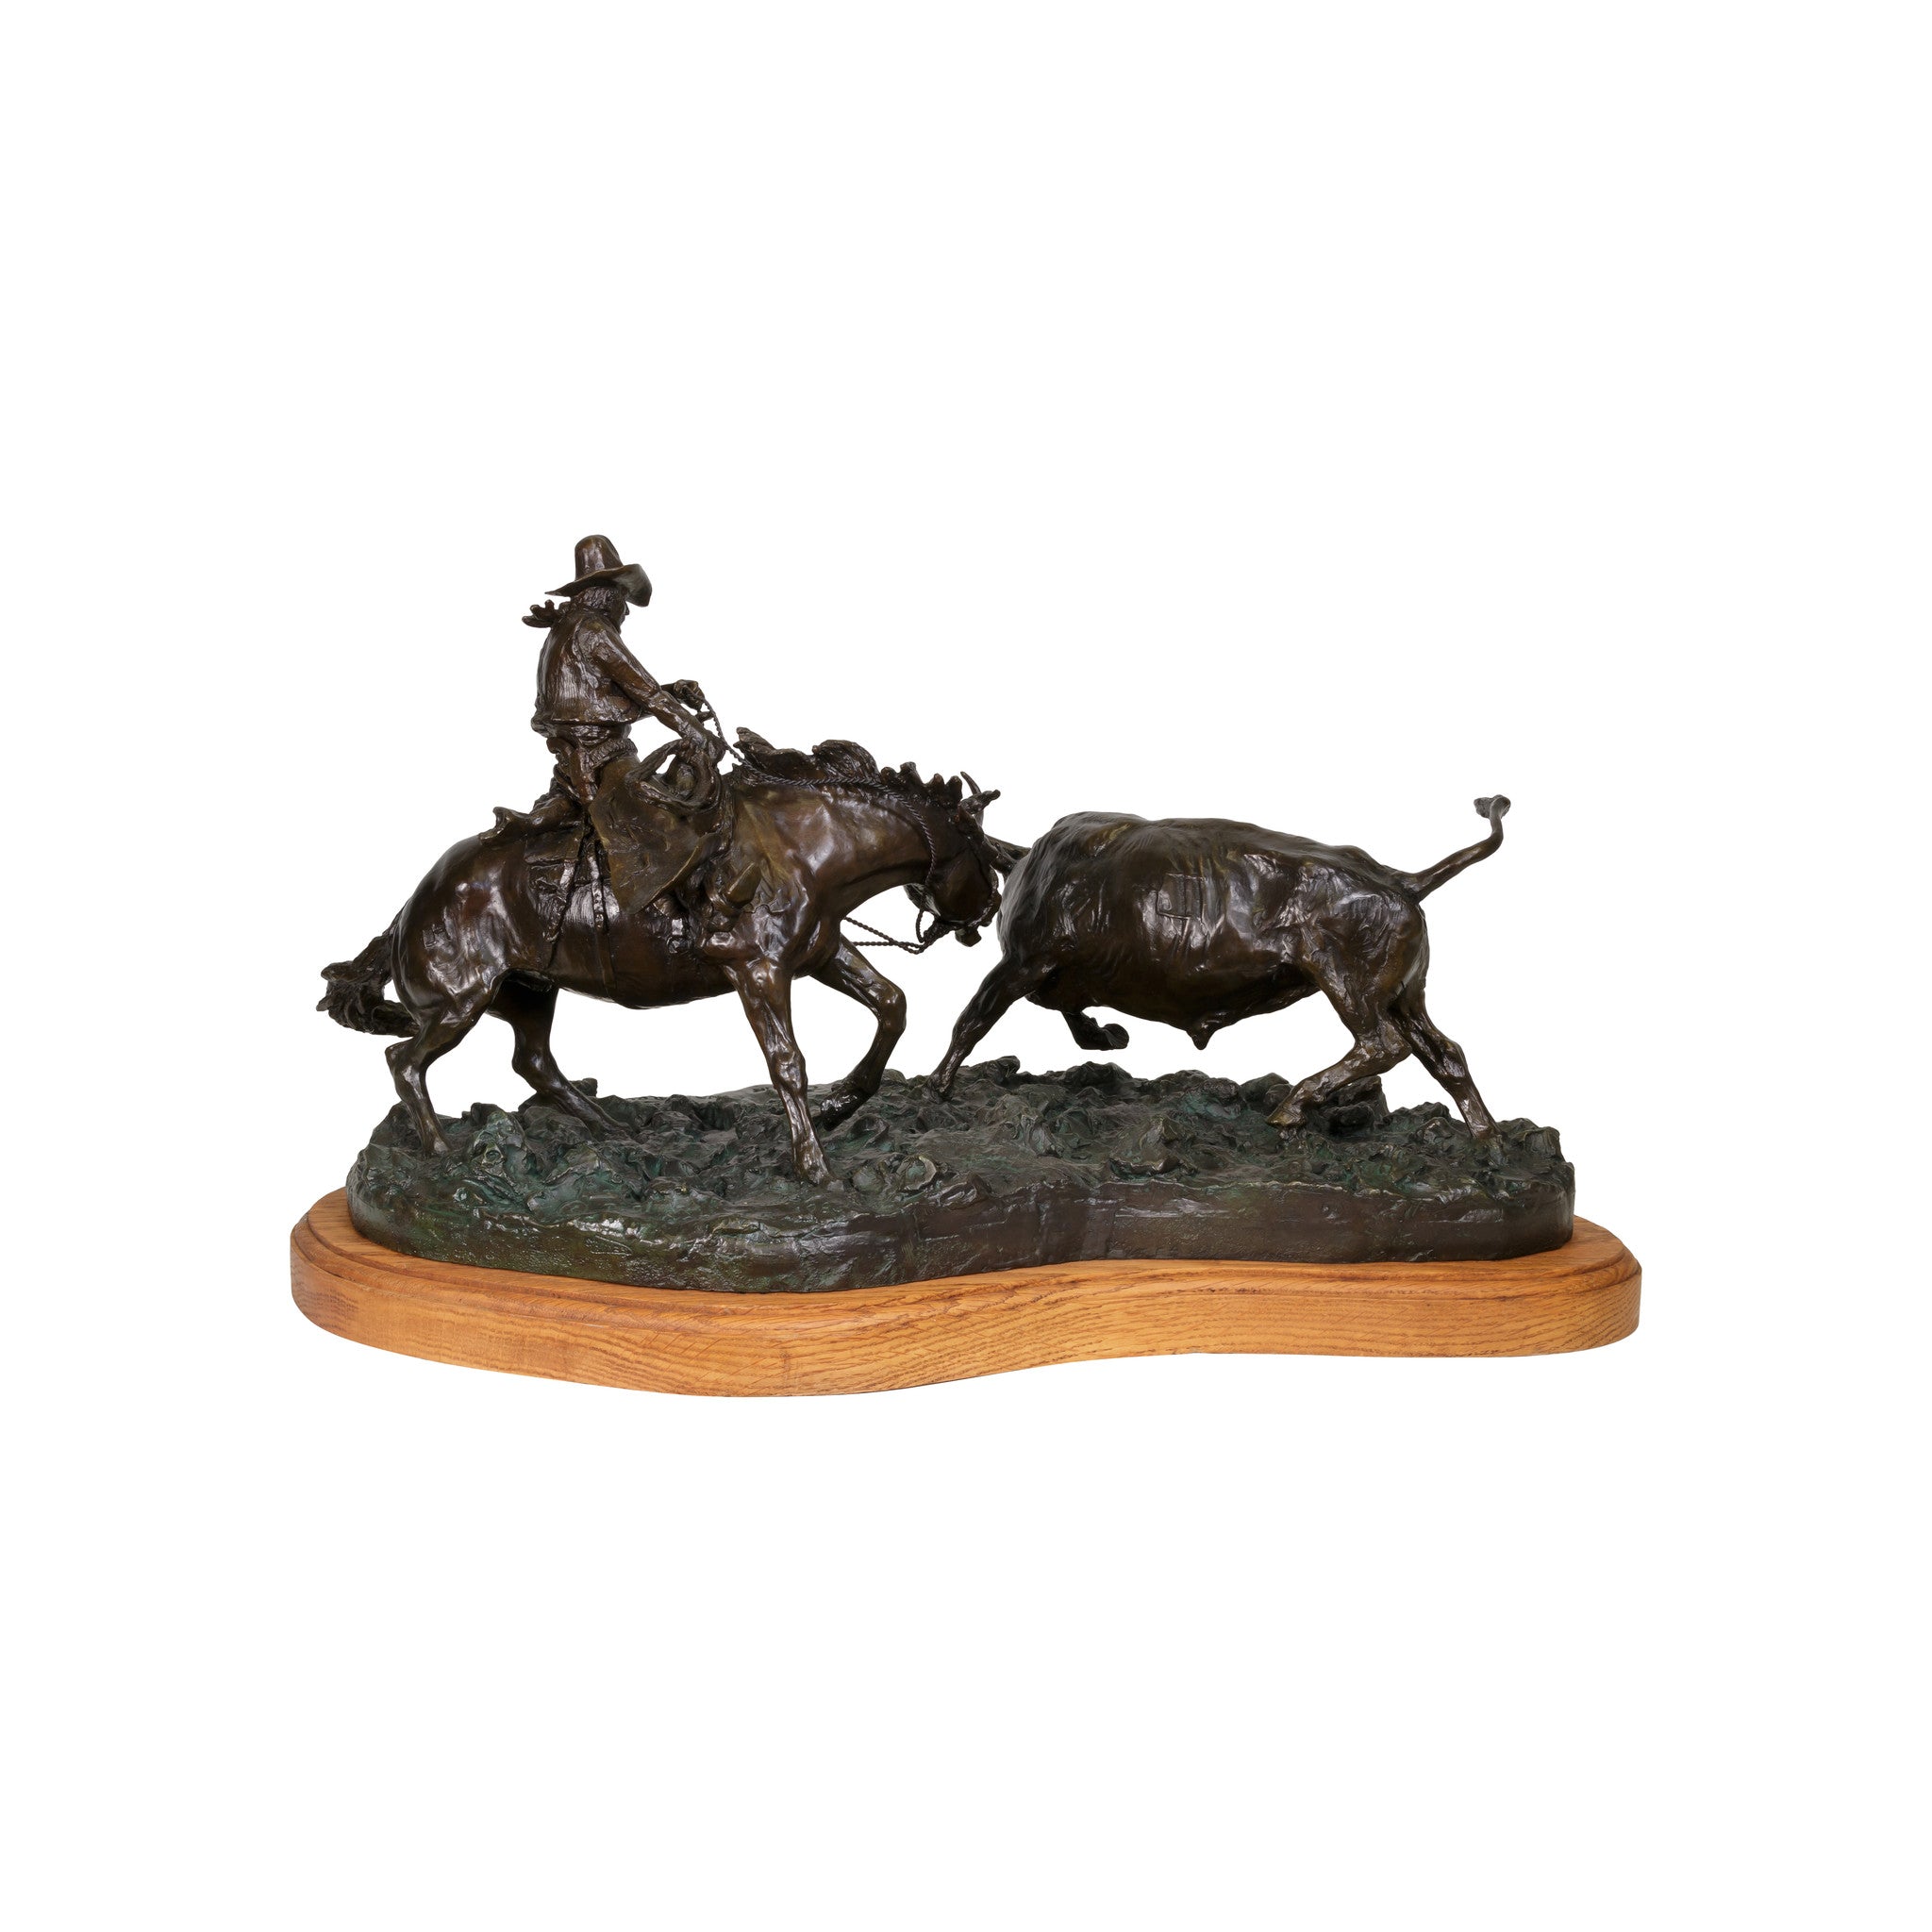 "When Cutting Was Tough" Bronze by Robert Scriver